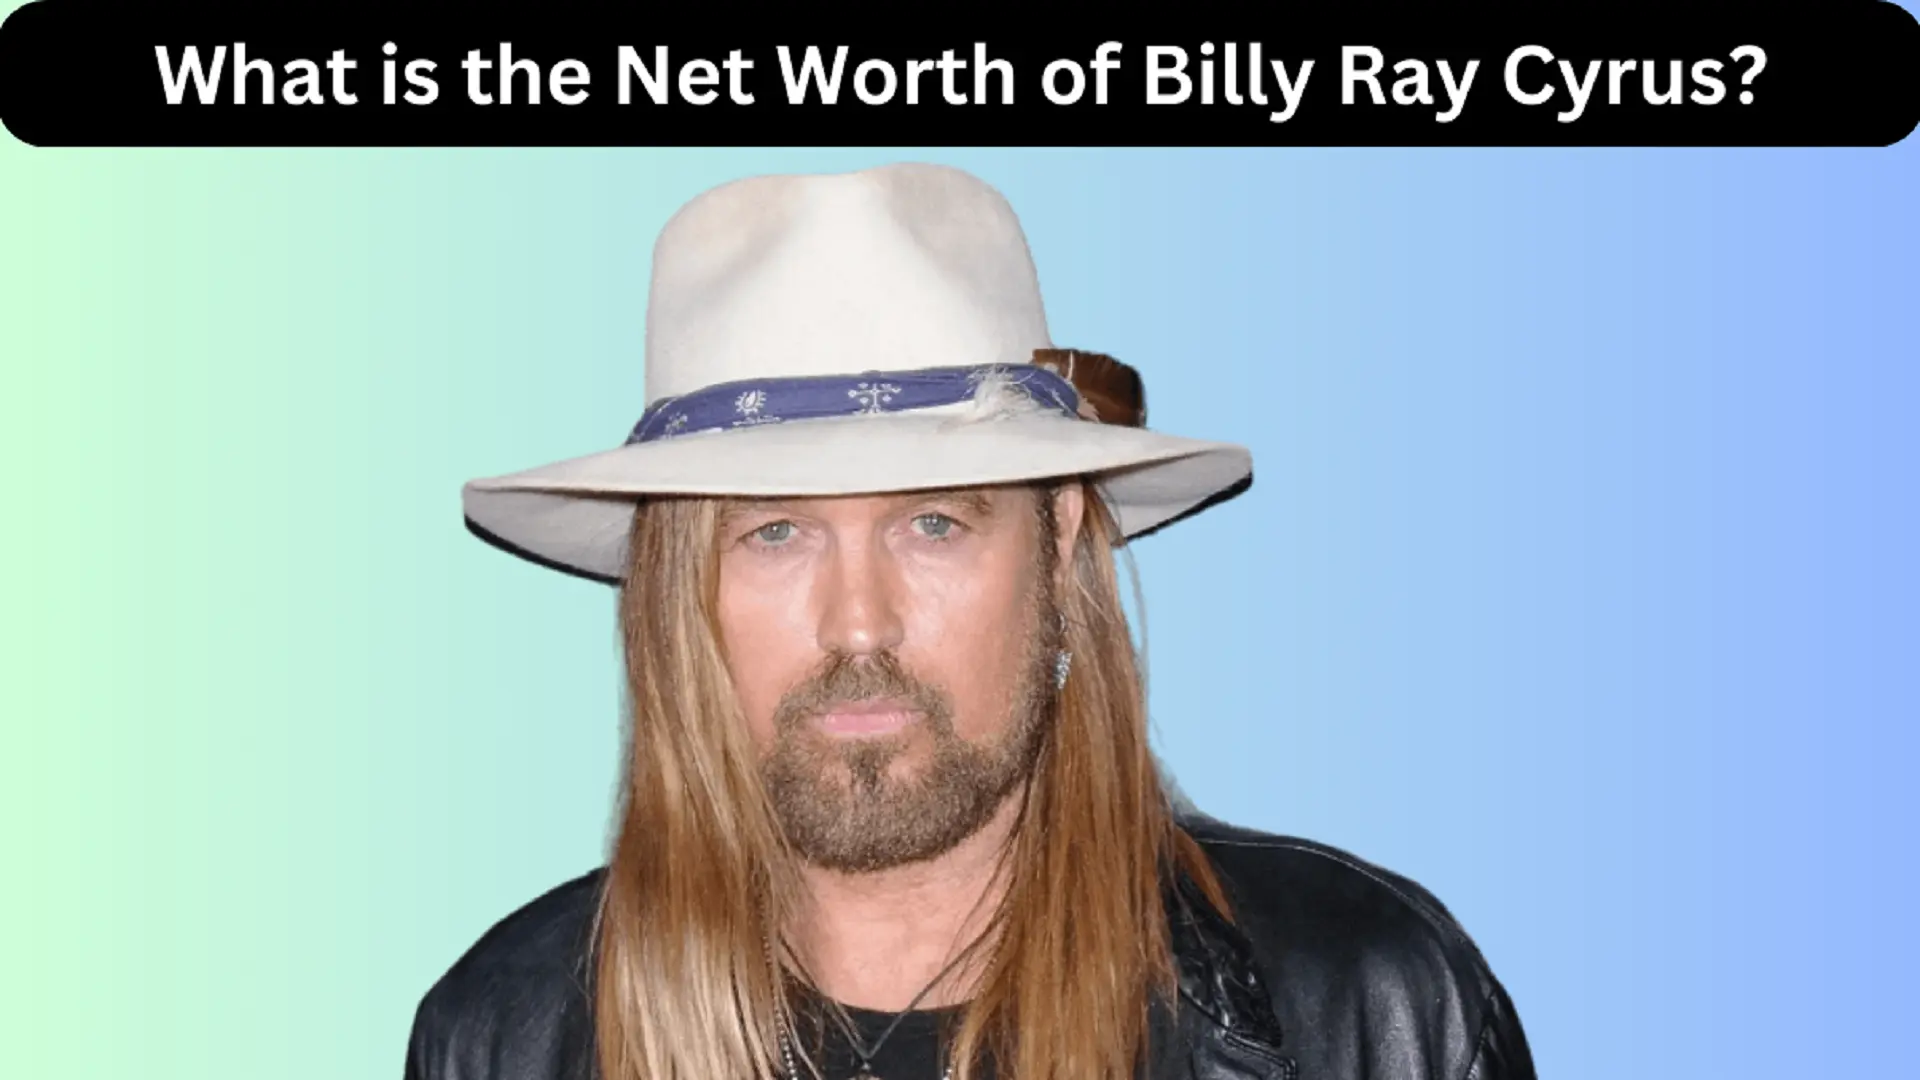 What is the Net Worth of Billy Ray Cyrus